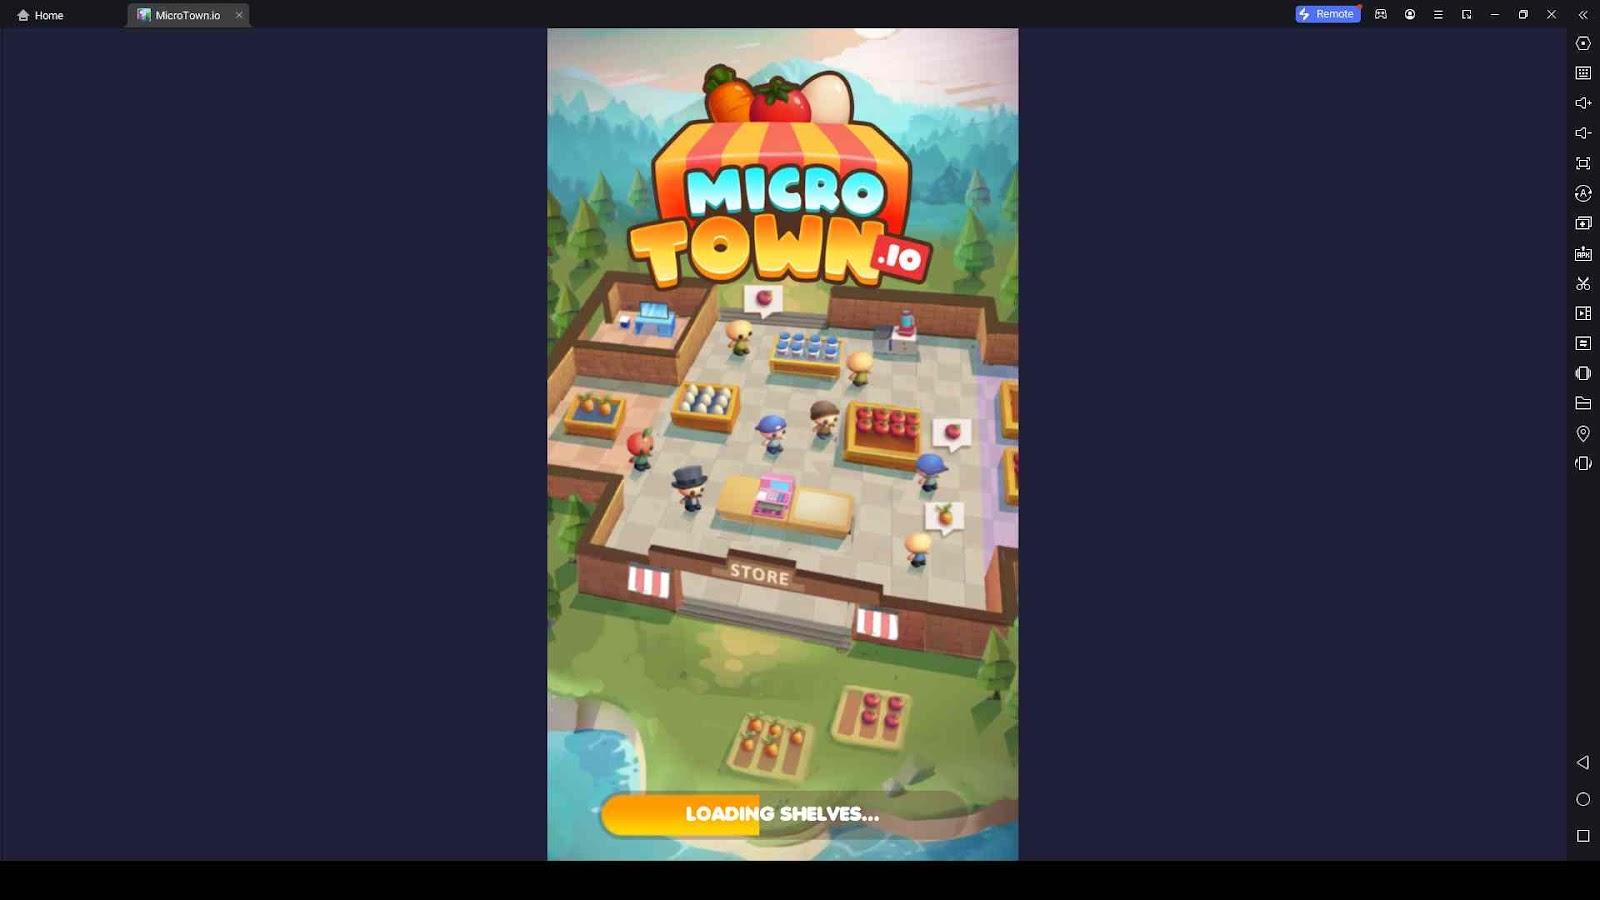 Build Your Business with MicroTown.io - My Little Town Tips